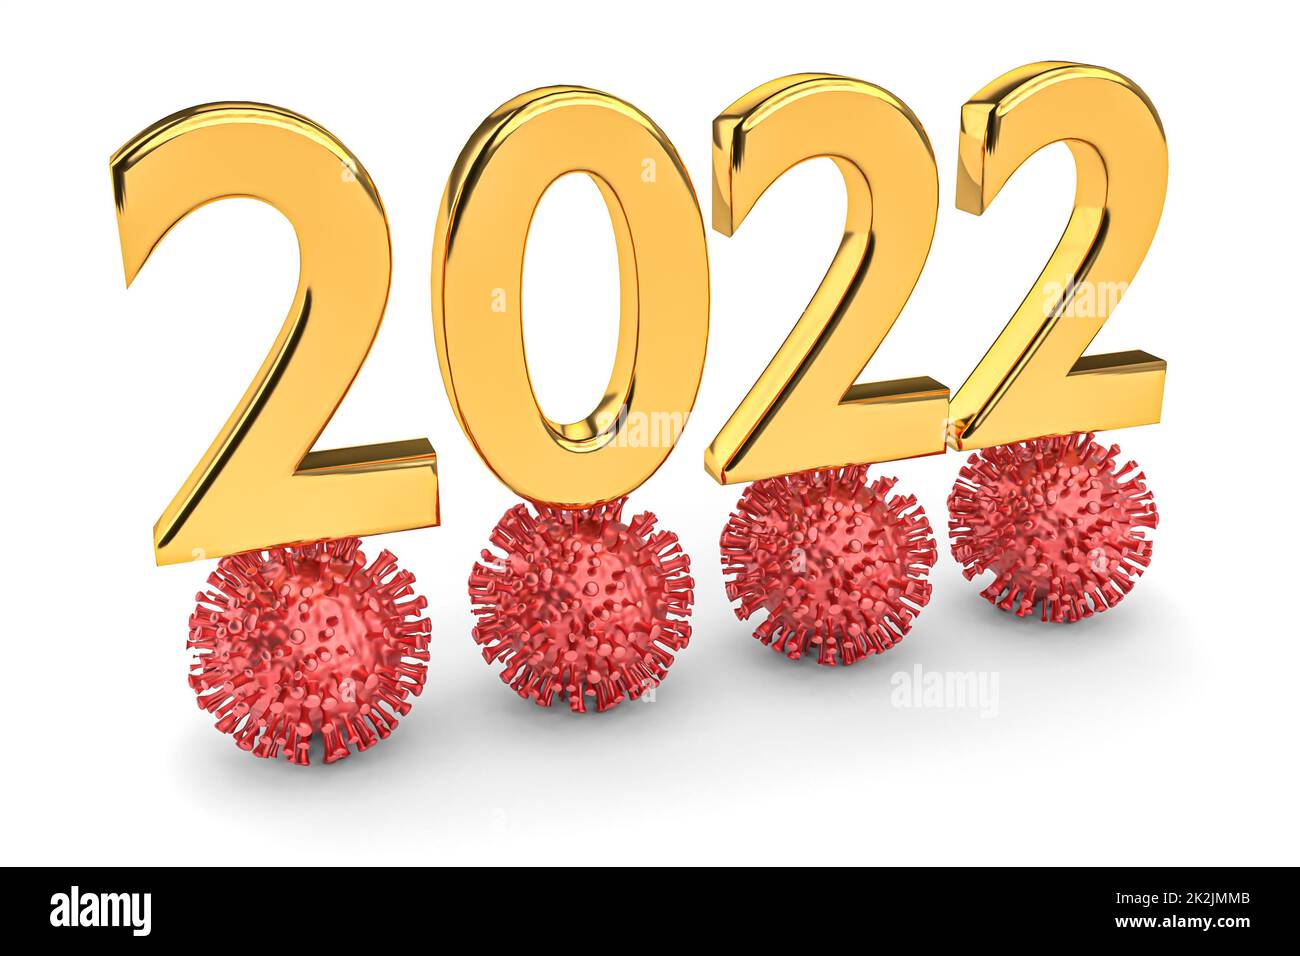 2022 is the year of the coronavirus. Digit 2022 with viruses. 3d rendering Stock Photo